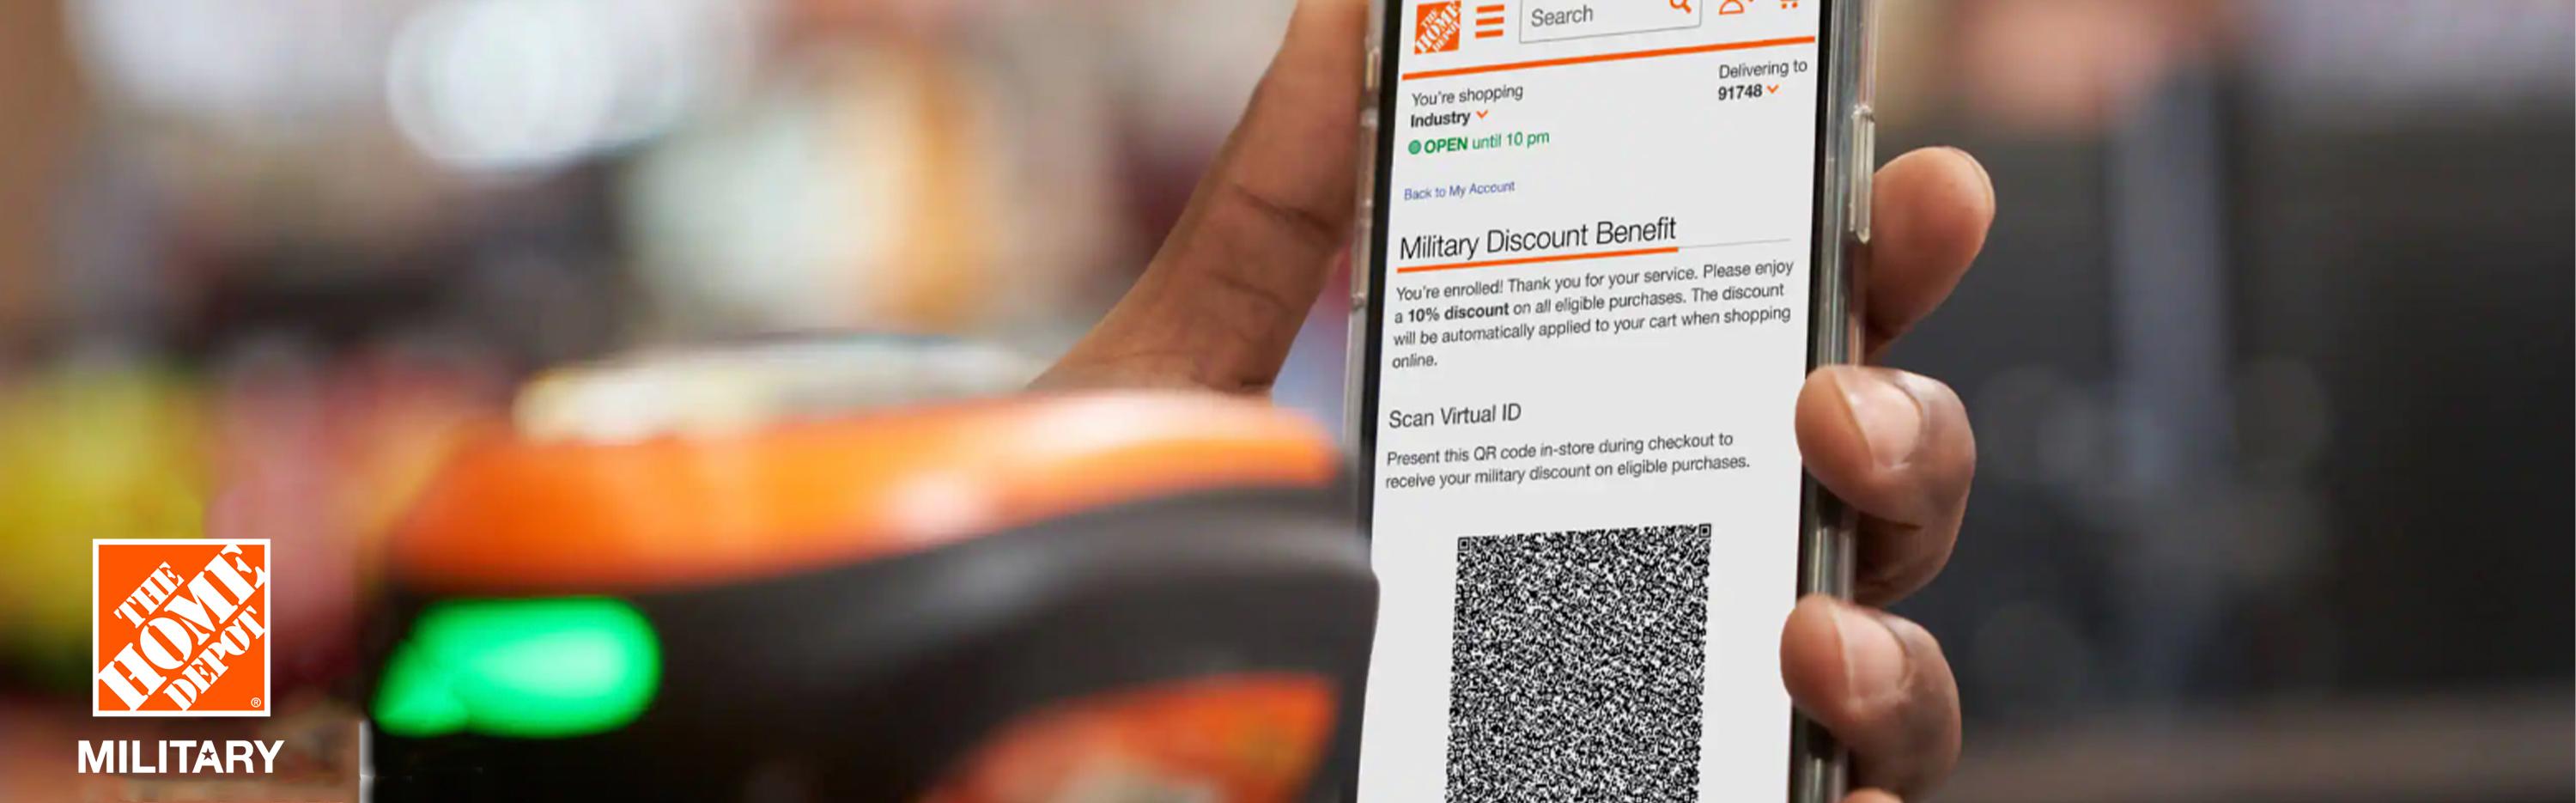 How-To: Claim Your Military Discount at The Home Depot | The Home Depot